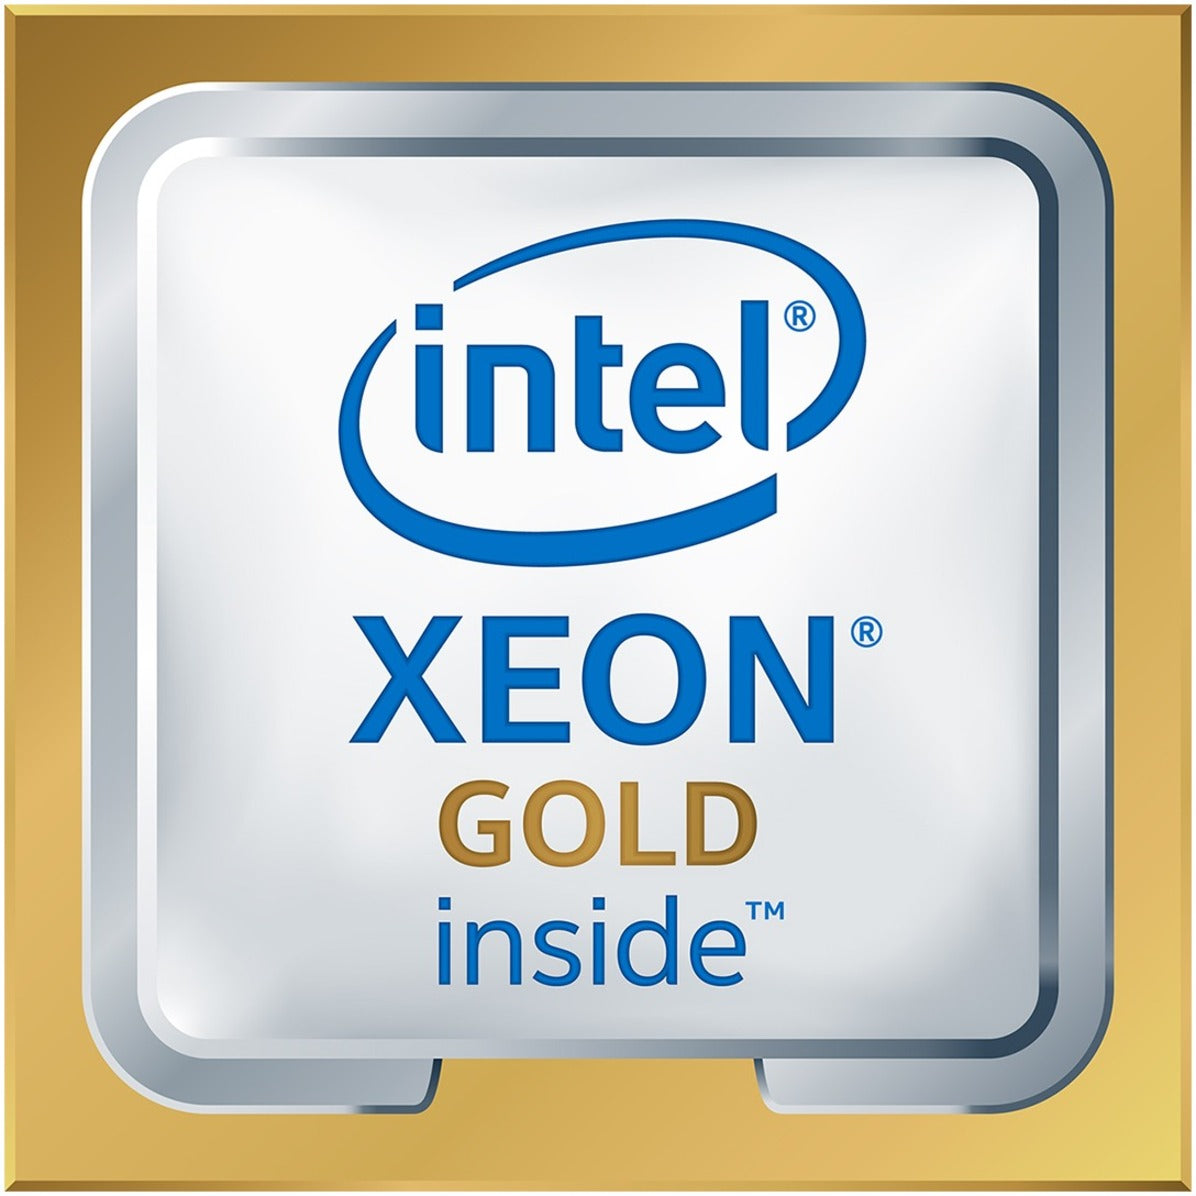 HPE P24170-L21 Xeon Gold Hexadeca-core 6226R 2.90 GHz Processor Upgrade, 16 Core, 22MB Cache, 150W TDP